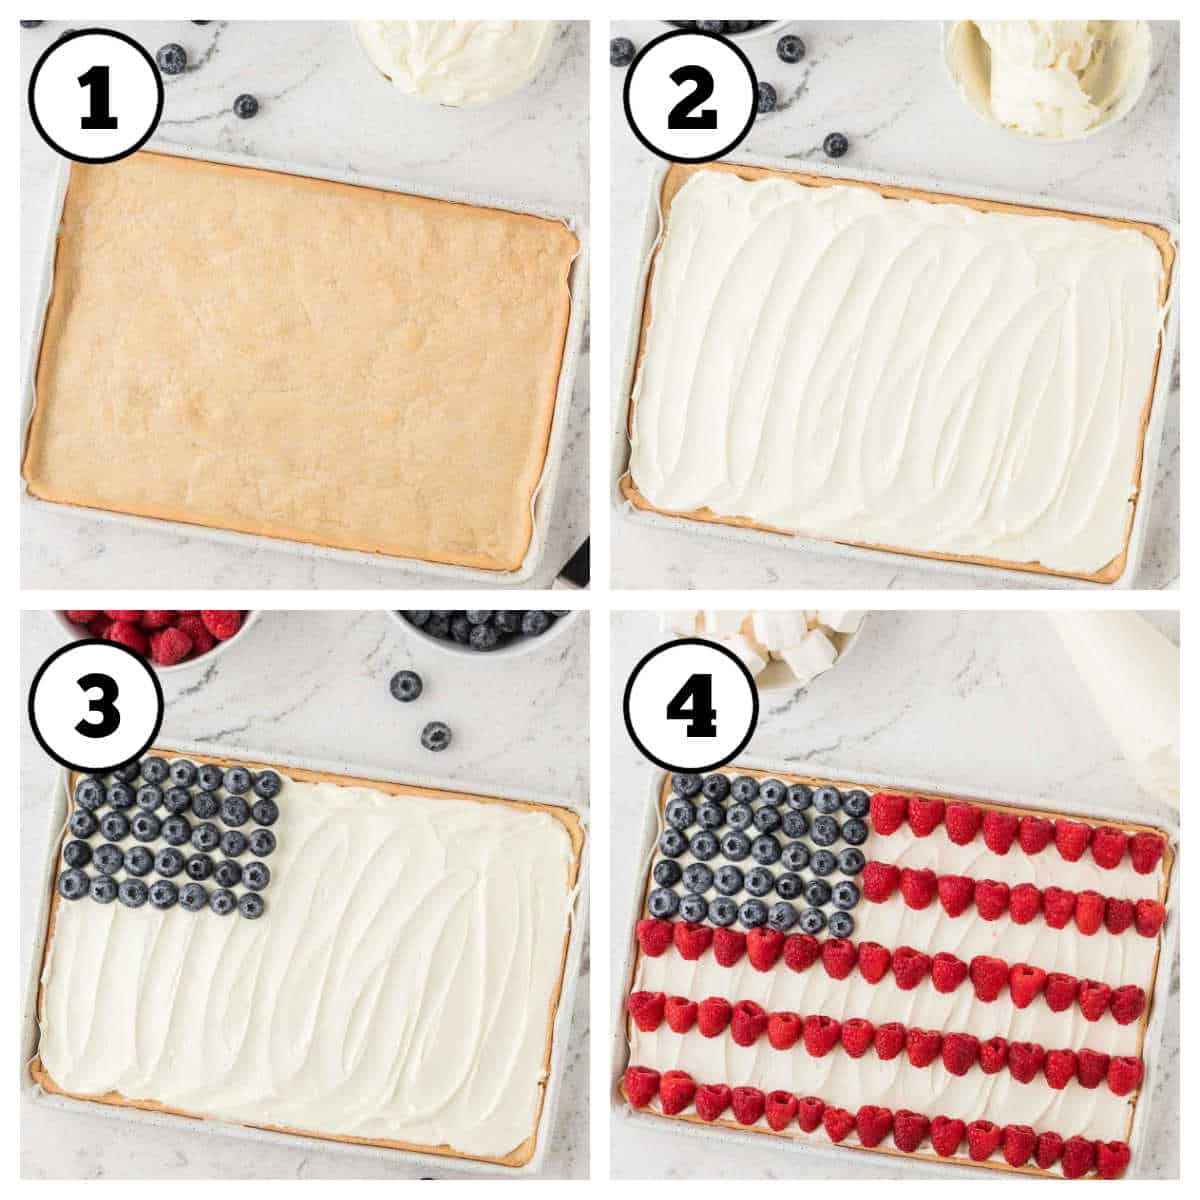 Steps 1-4 to make American flag fruit pizza.